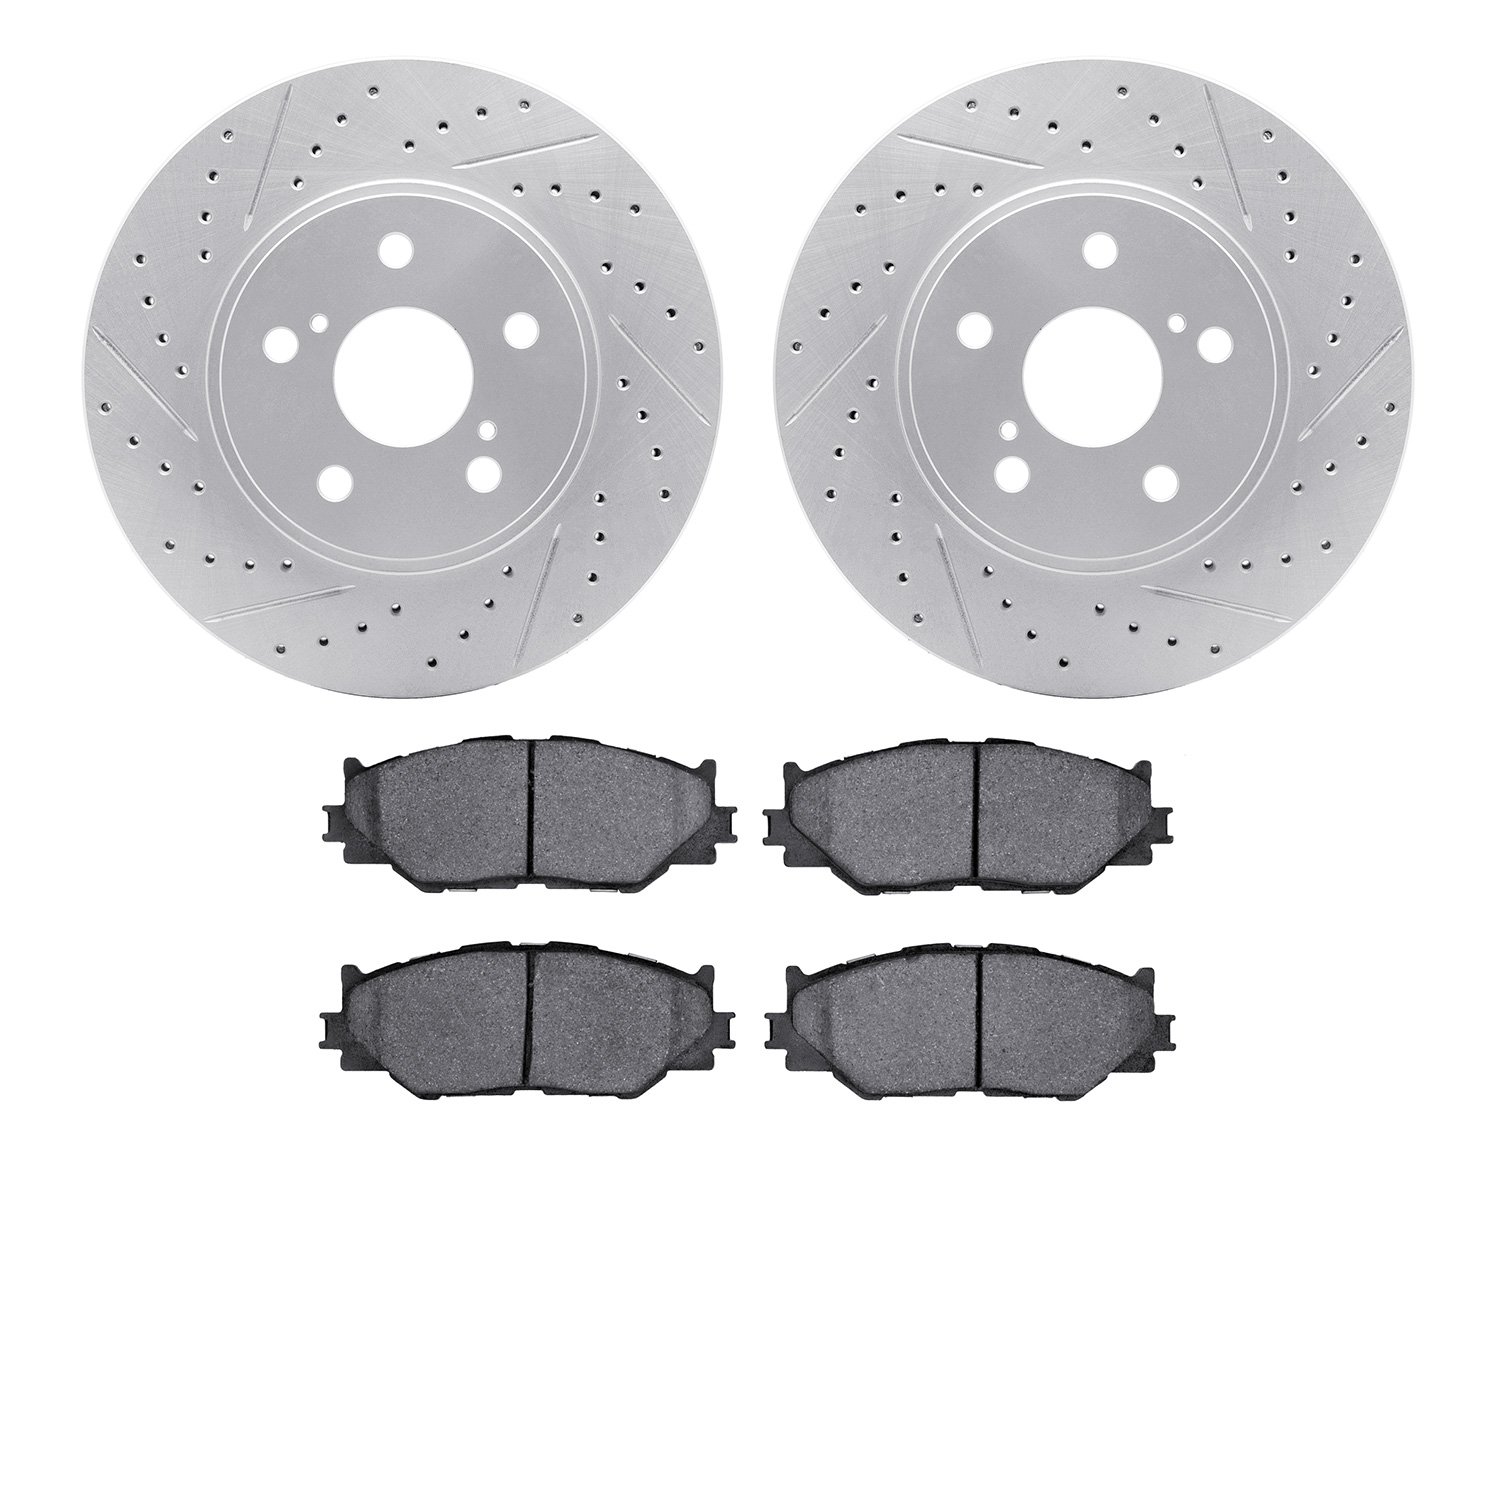 2502-76027 Geoperformance Drilled/Slotted Rotors w/5000 Advanced Brake Pads Kit, 2006-2015 Lexus/Toyota/Scion, Position: Front